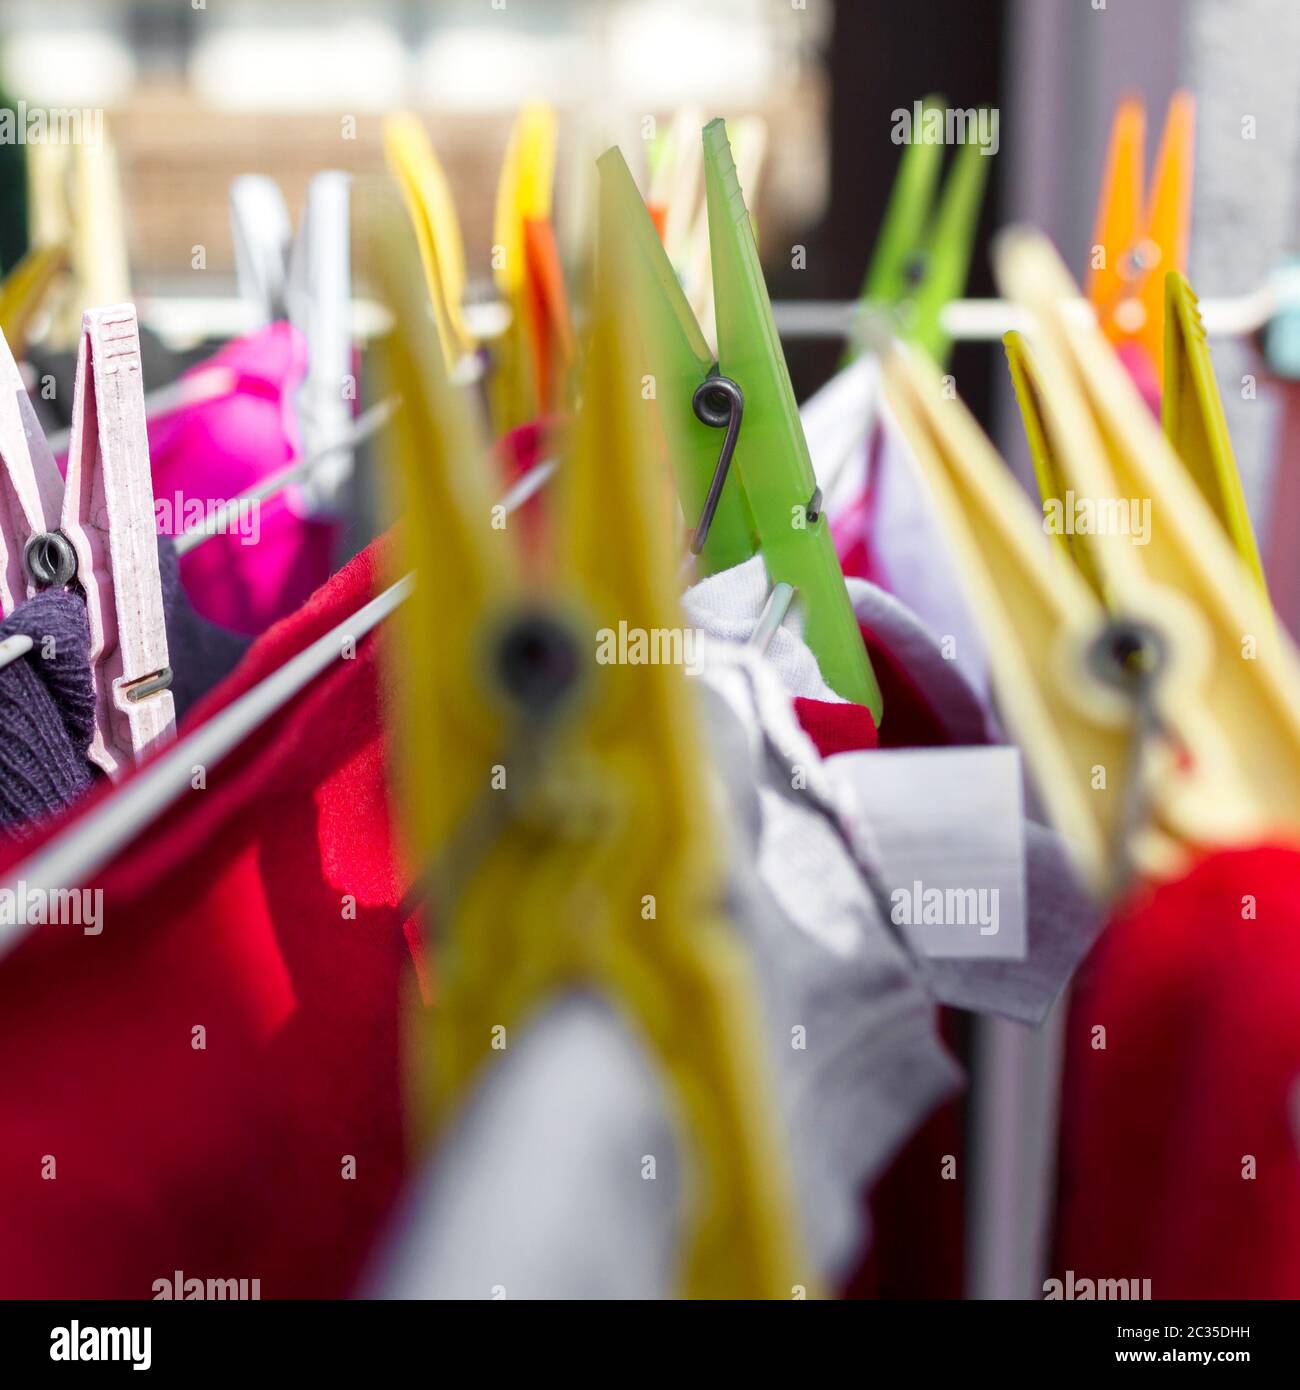 Colorful clothes pegs Stock Photo